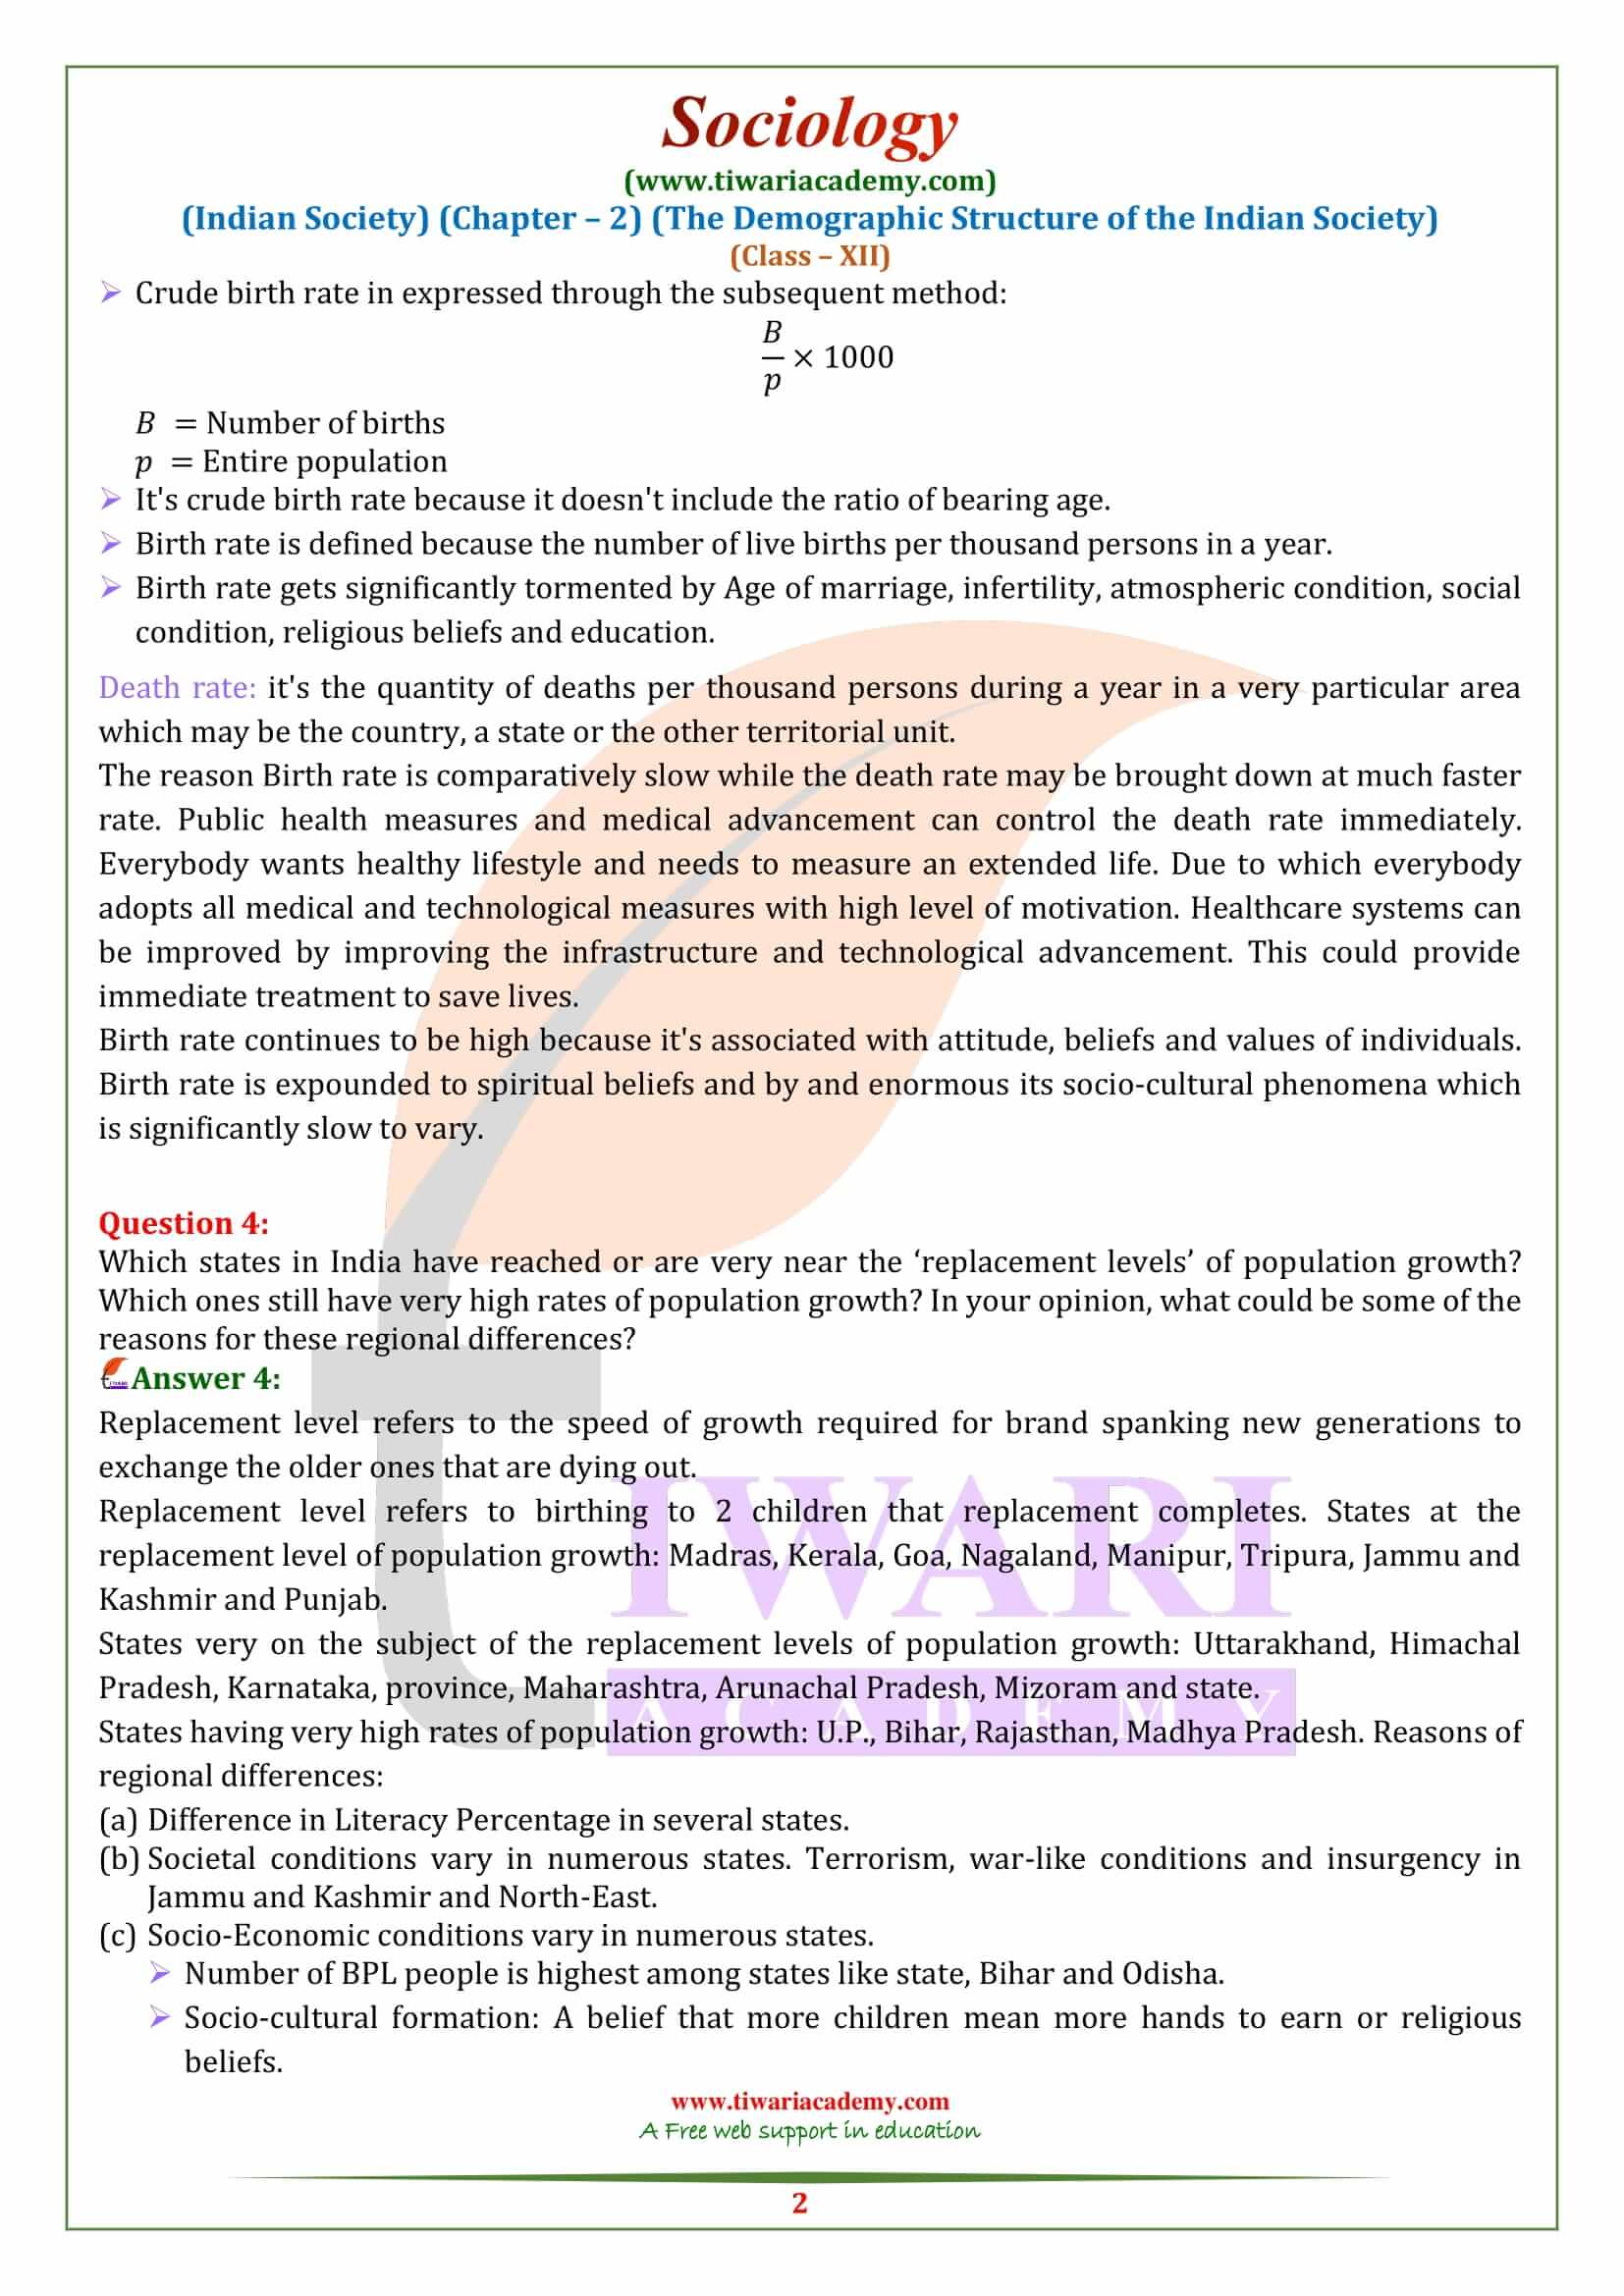 NCERT Solutions for Class 12 Sociology Chapter 2 in English Medium